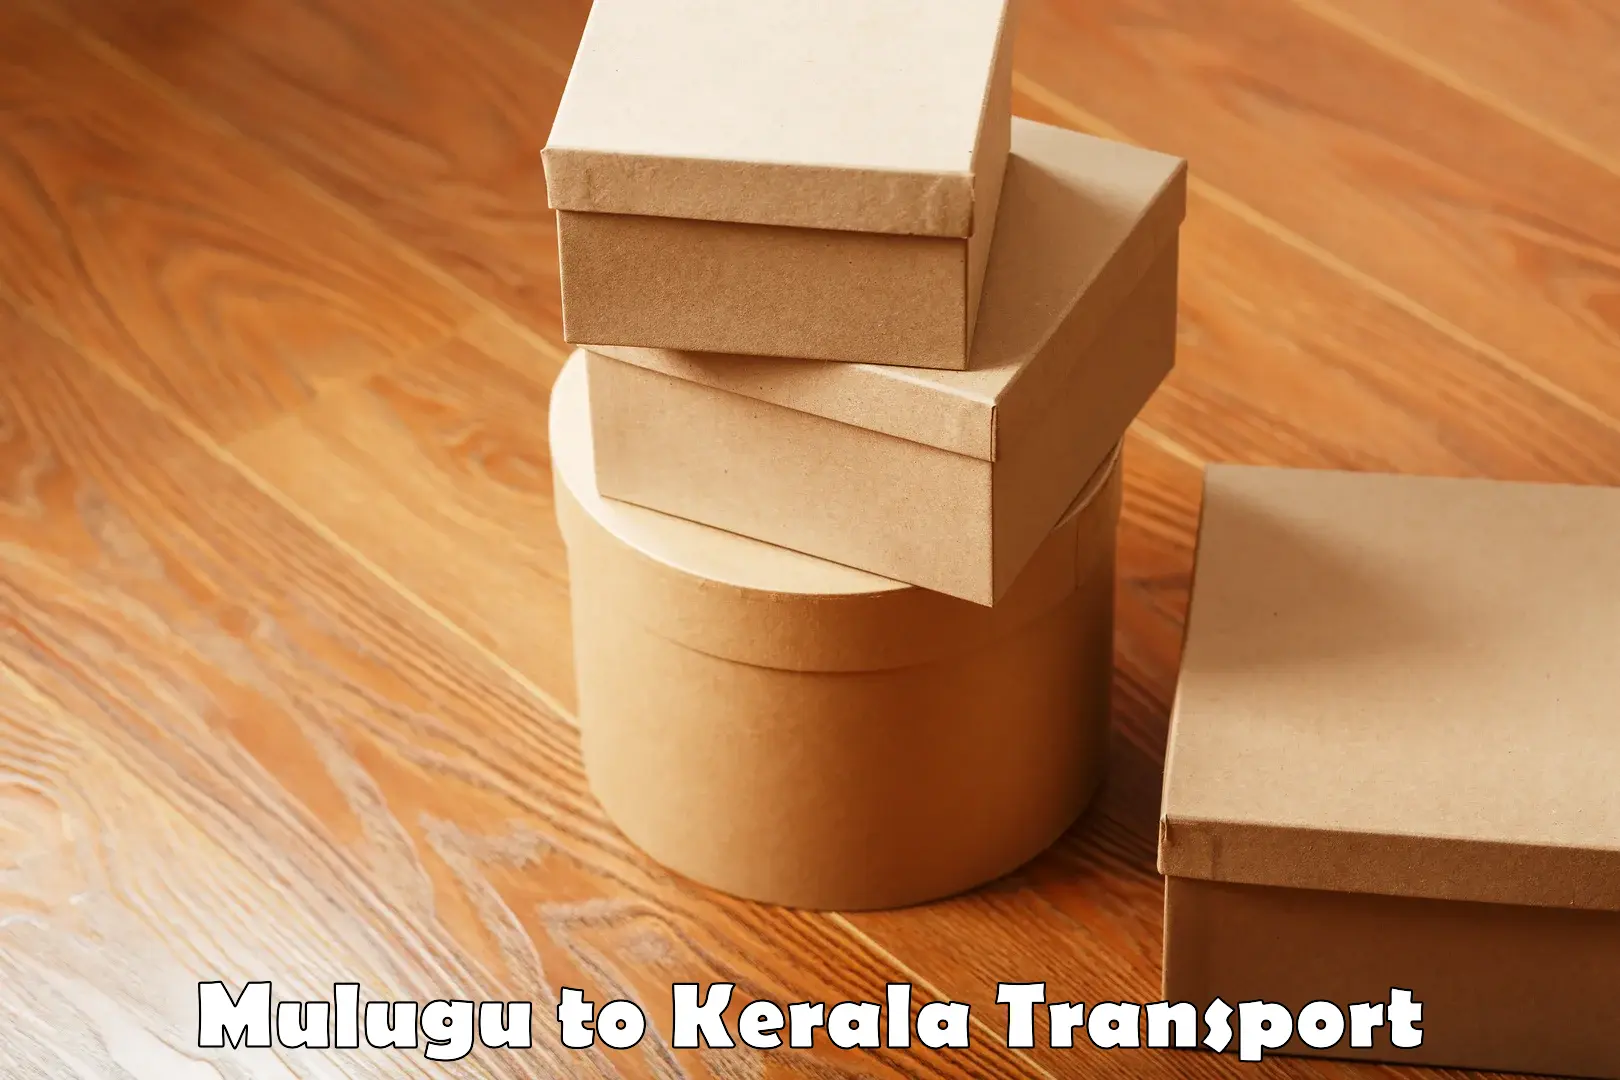 Express transport services Mulugu to Chengannur